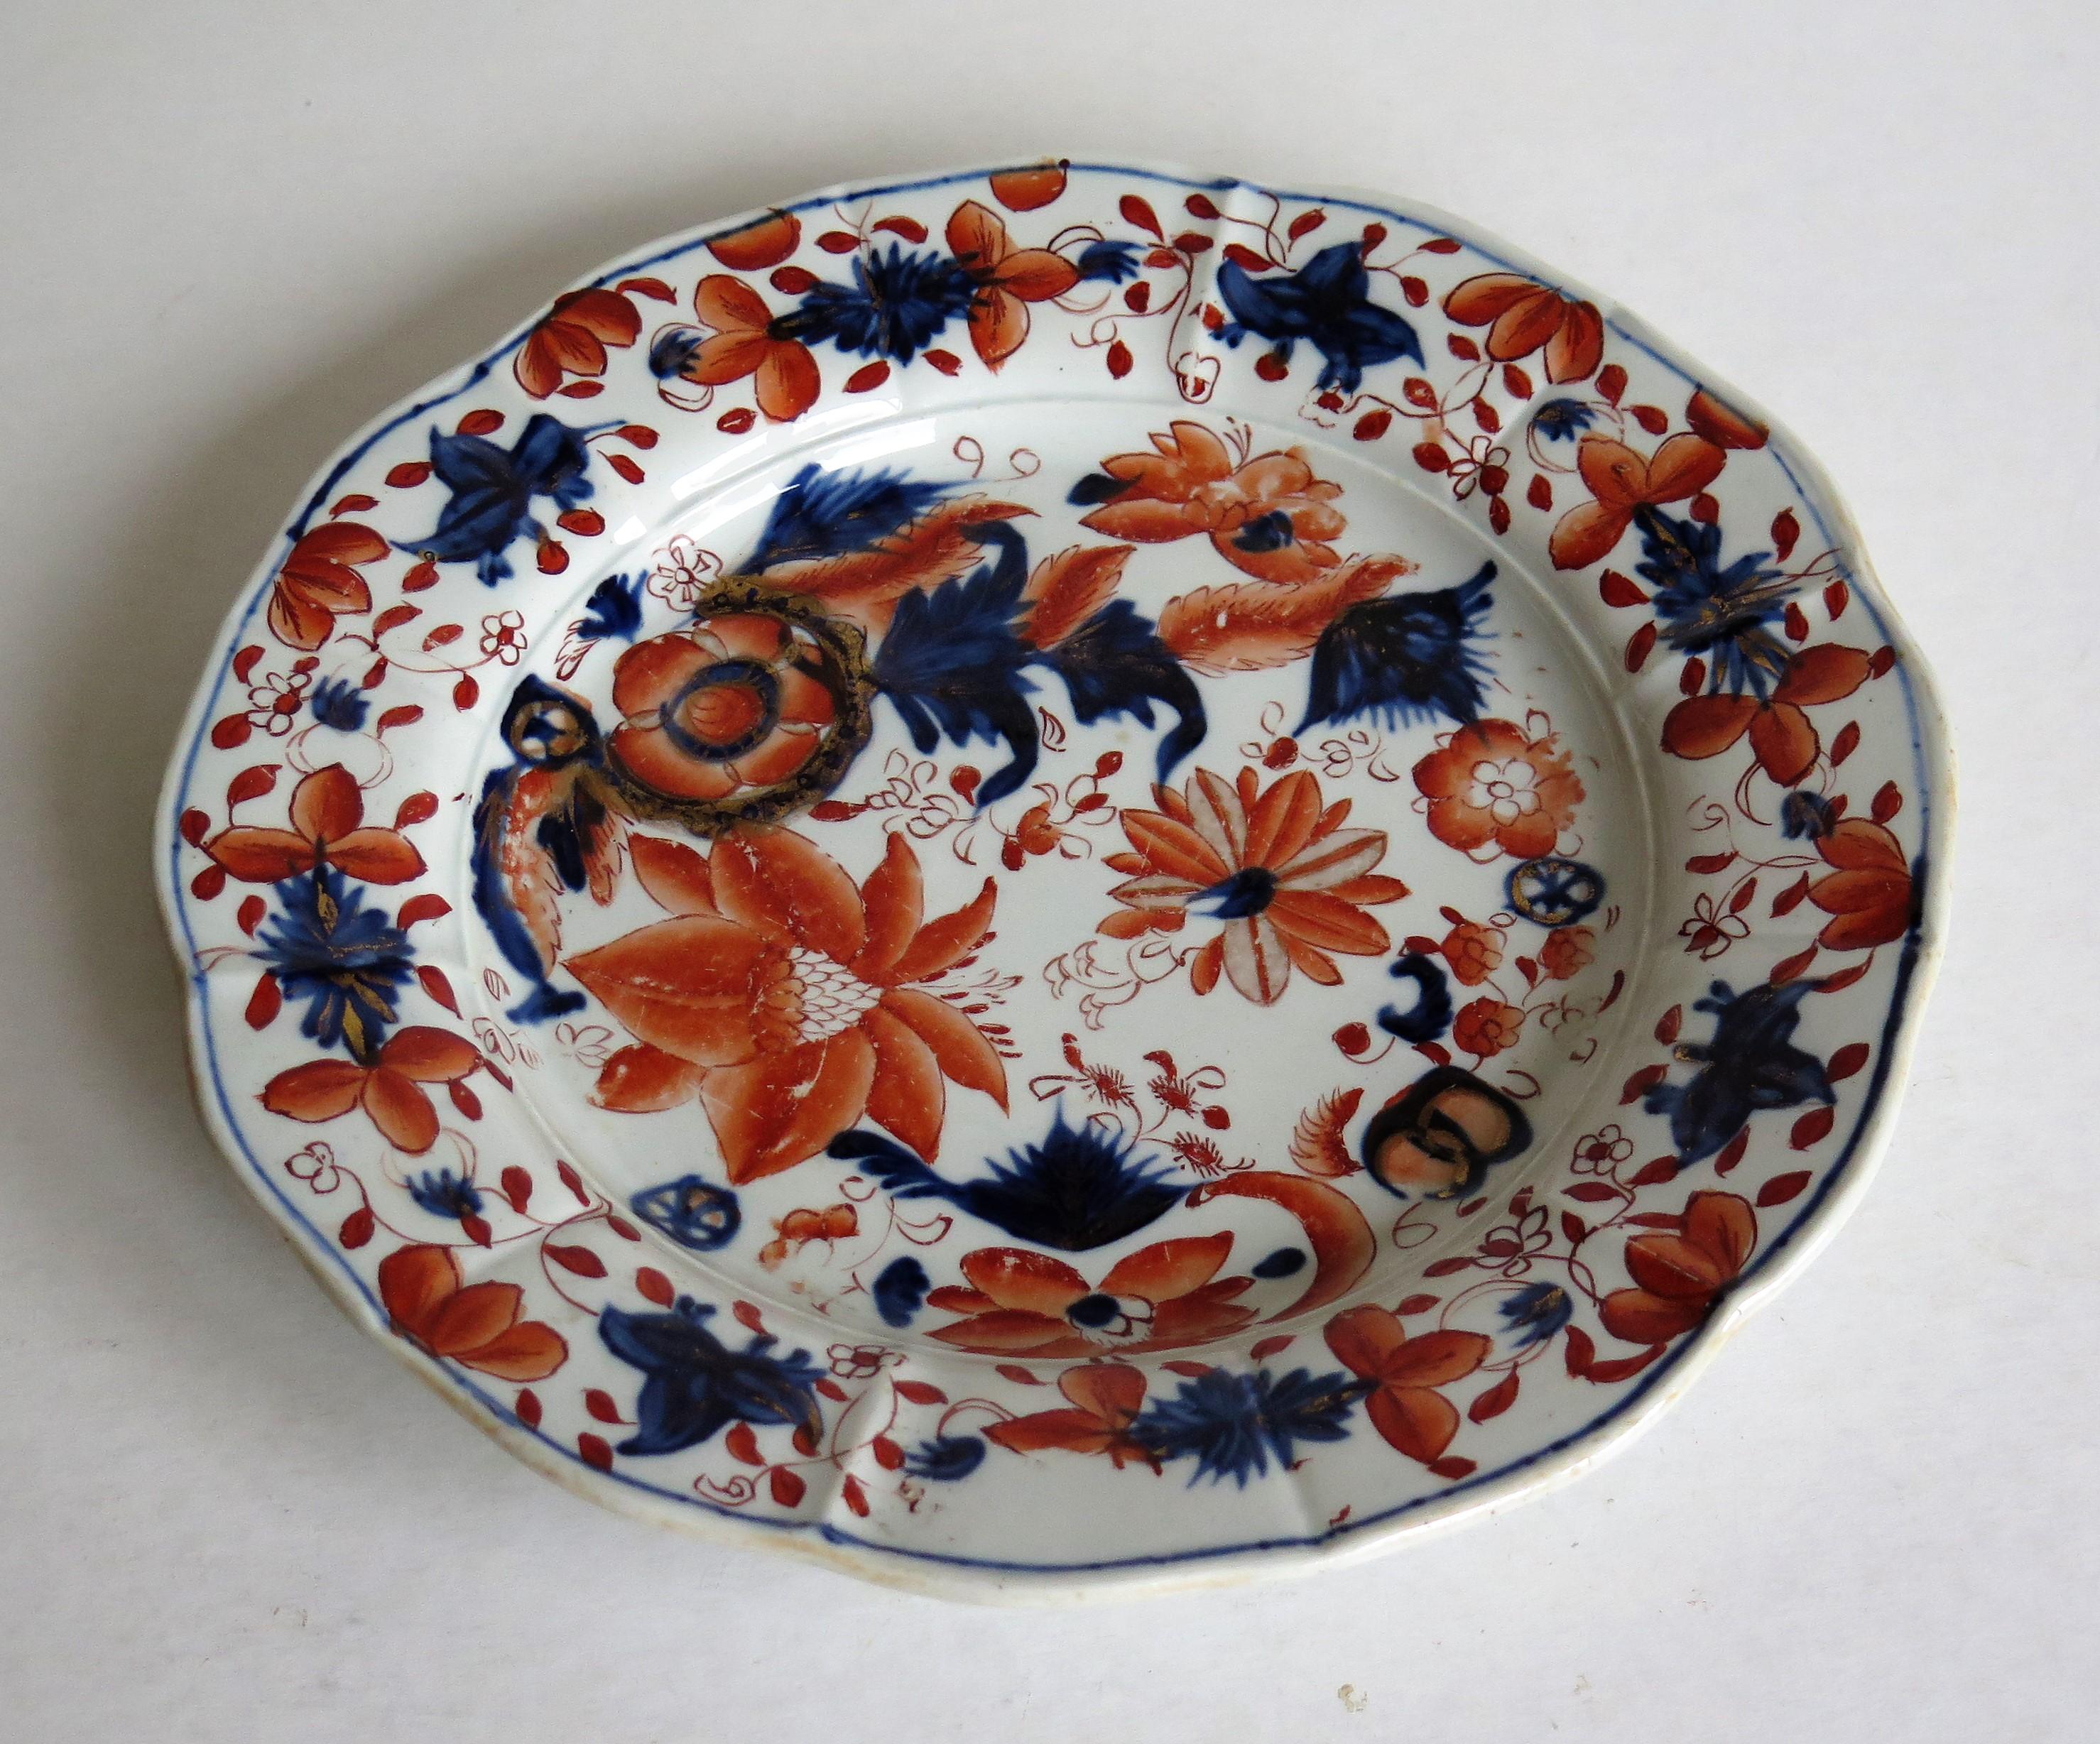 English Early Mason's Ironstone Dish or Plate Flowers and Wheels Rare Pattern Circa 1815